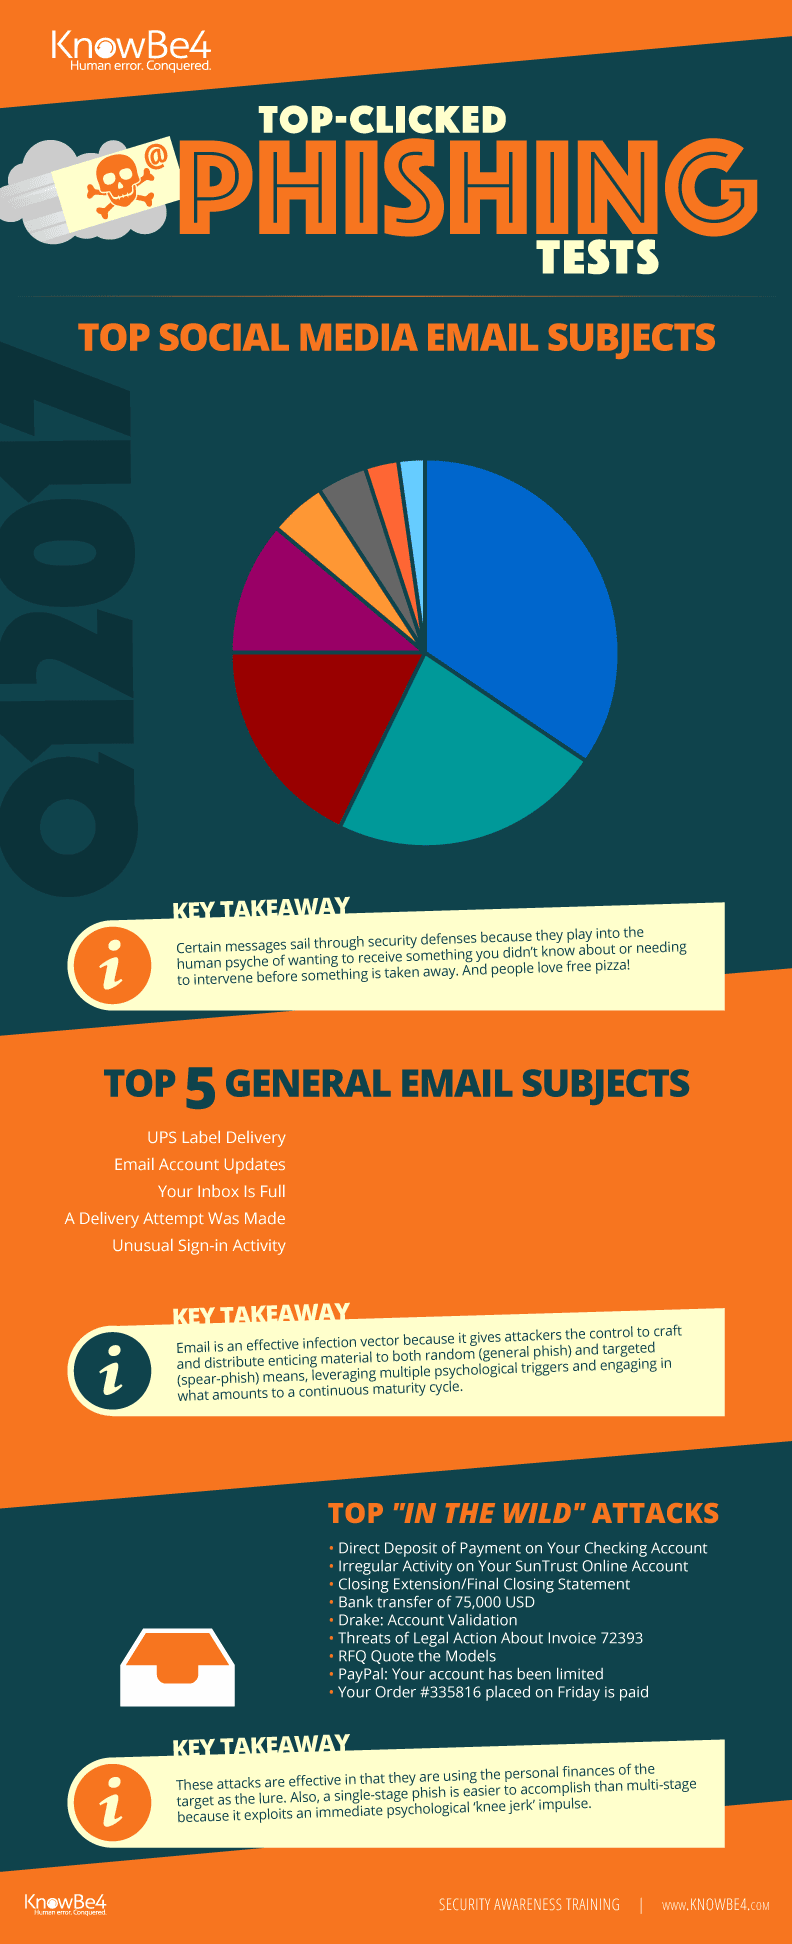 Q1 2017 Top Clicked Phishing Emails